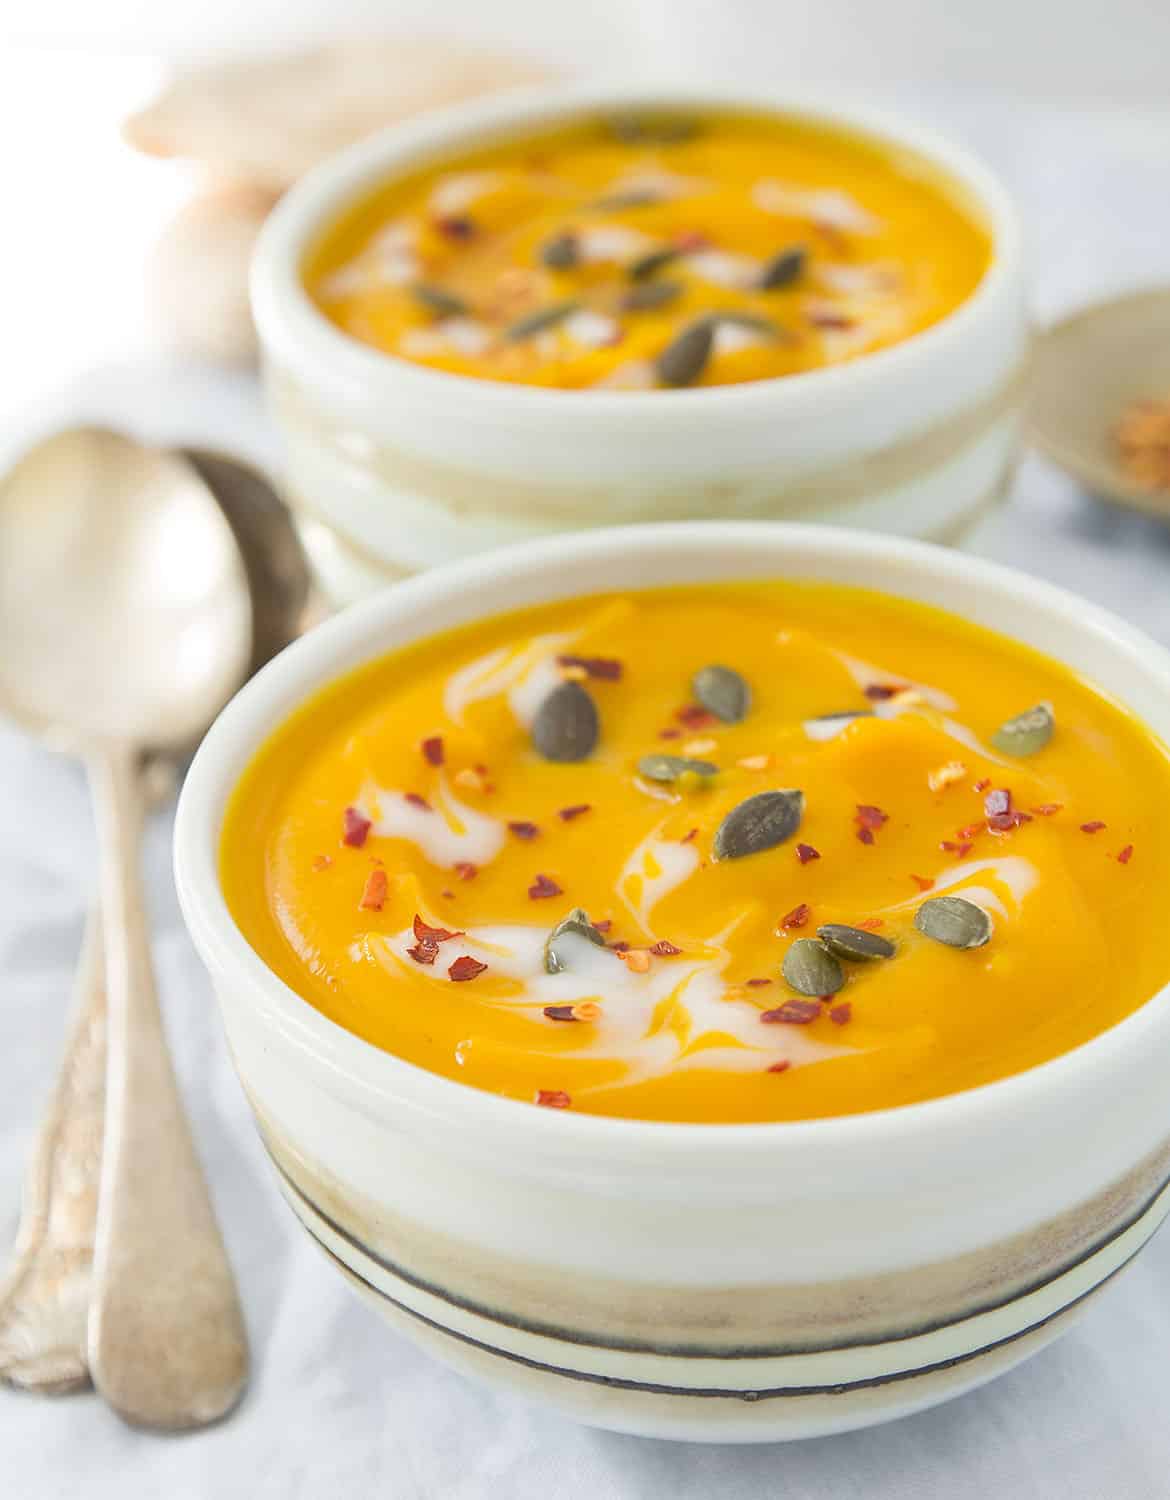 Spicy Pumpkin and Carrot soup